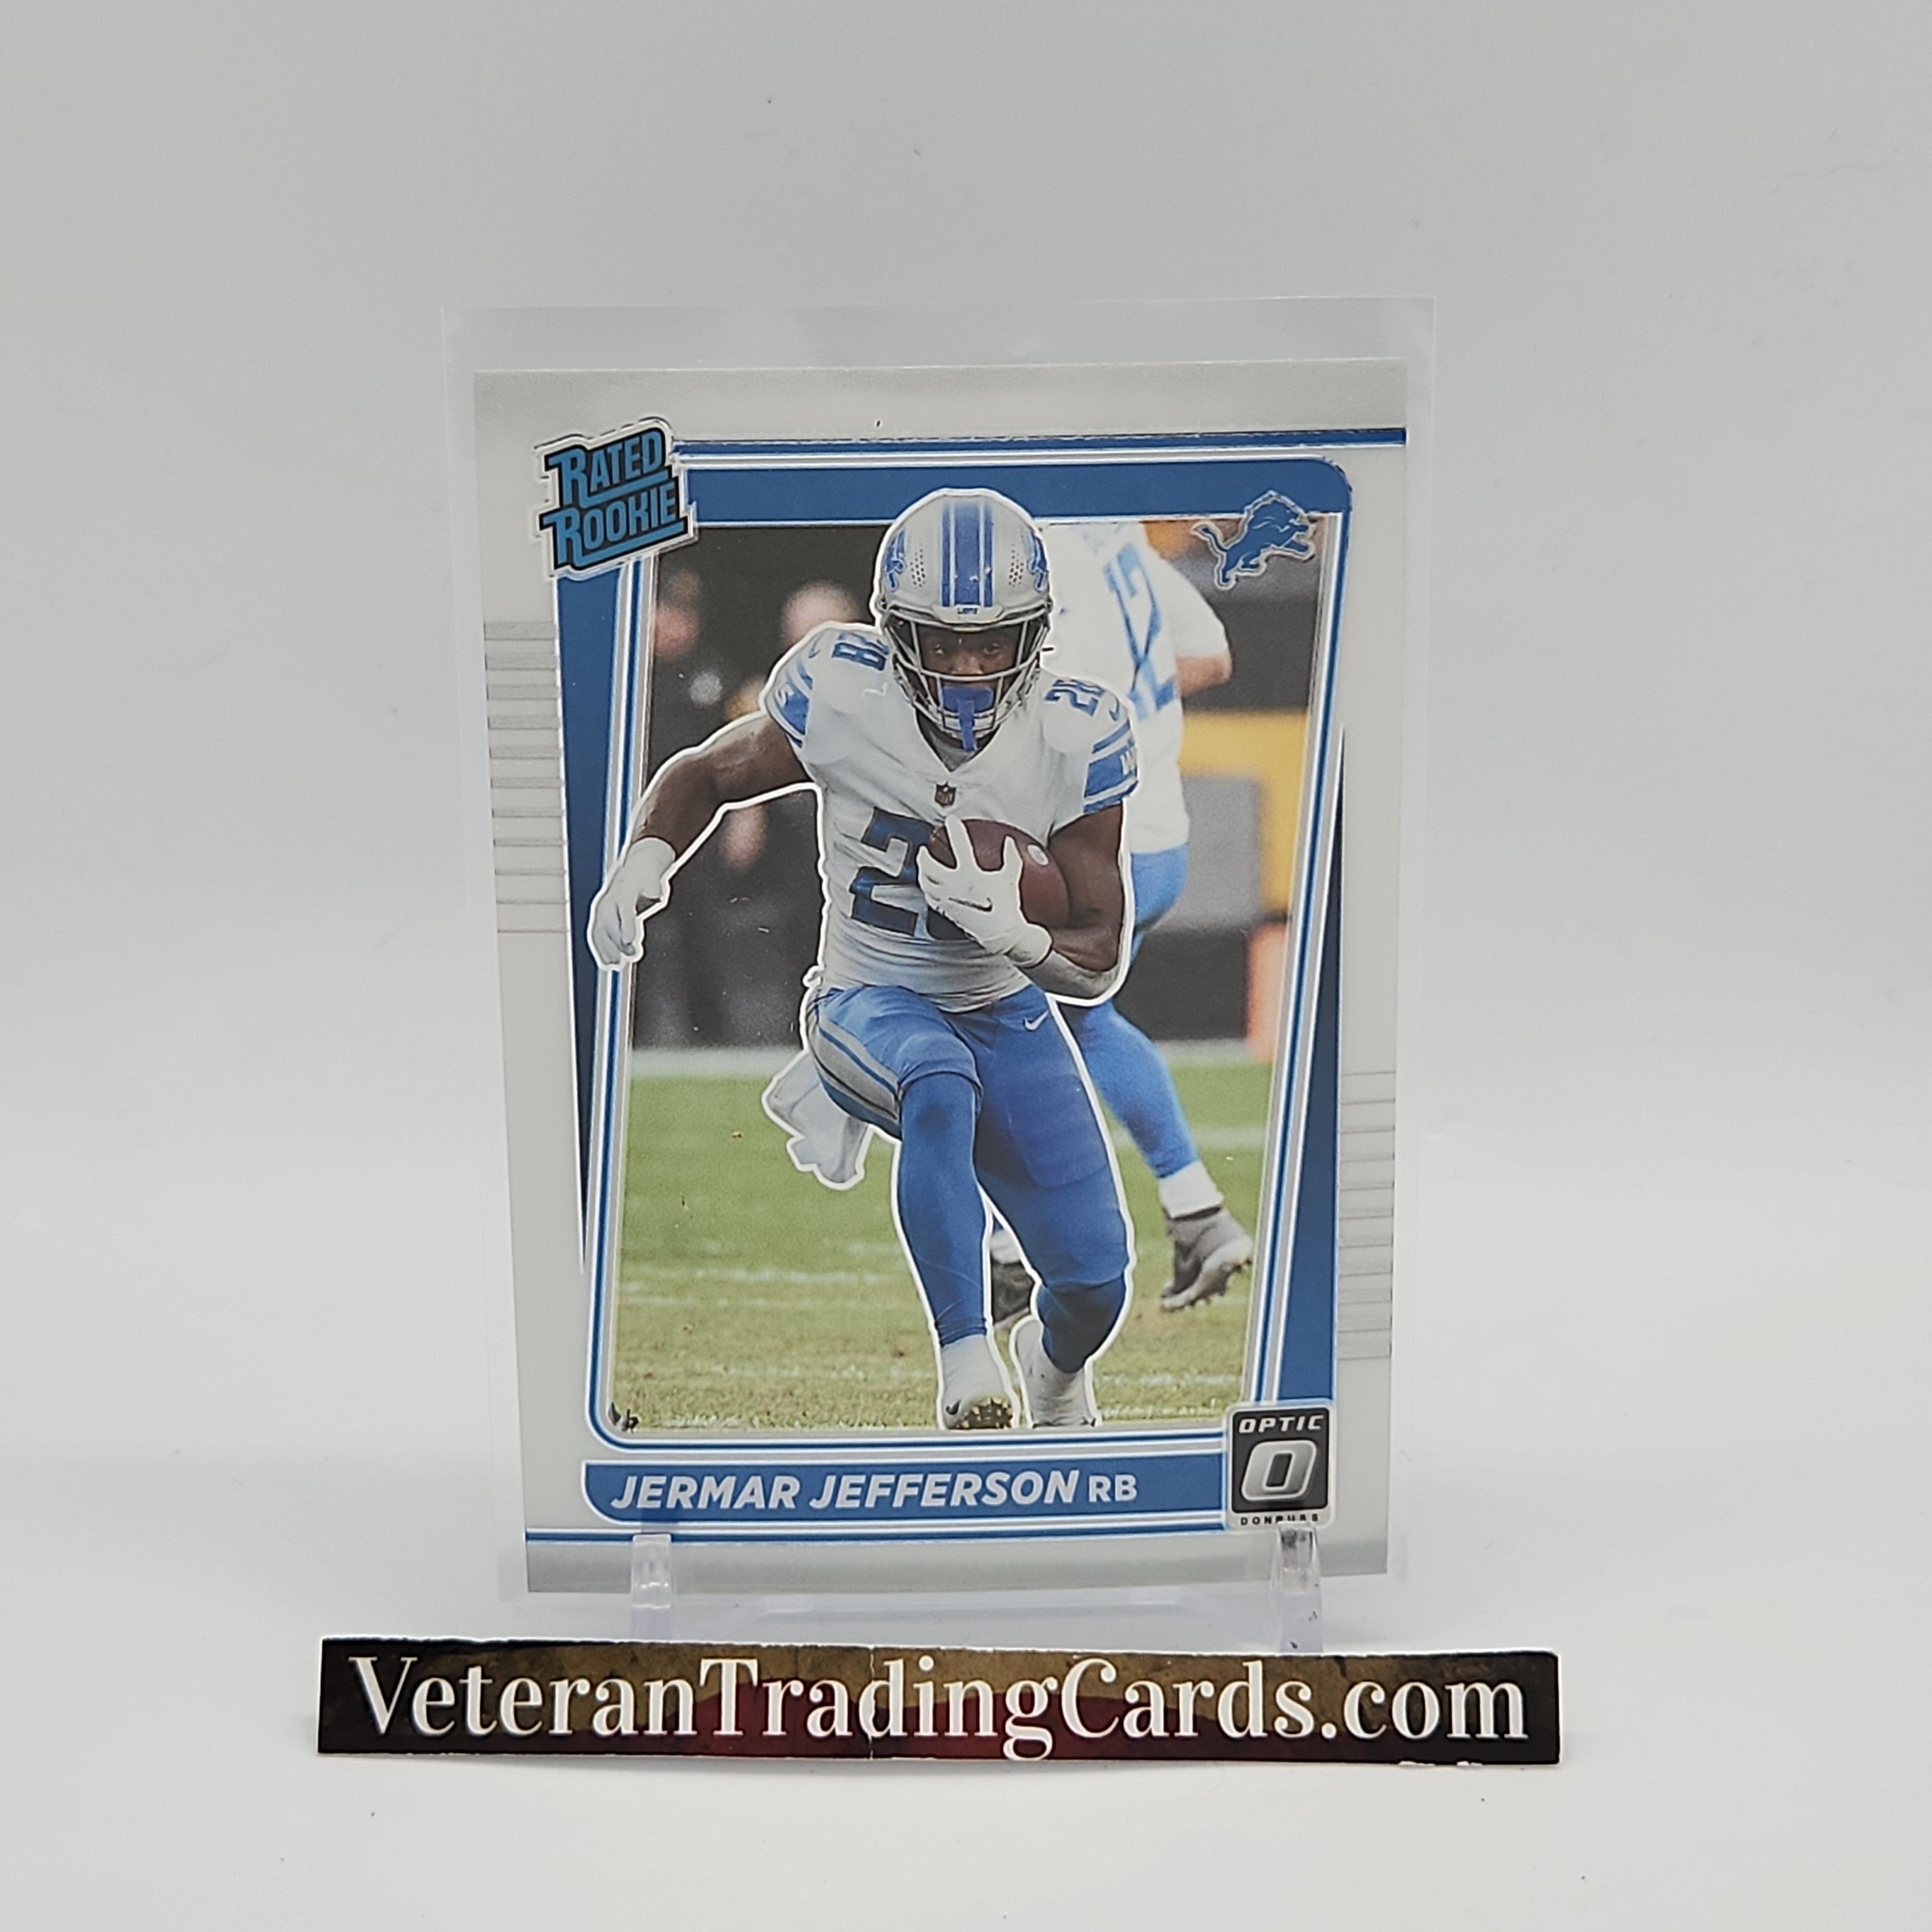 Jermar Jefferson Rated Rookie Optic Card #296 – Veteran Trading Cards